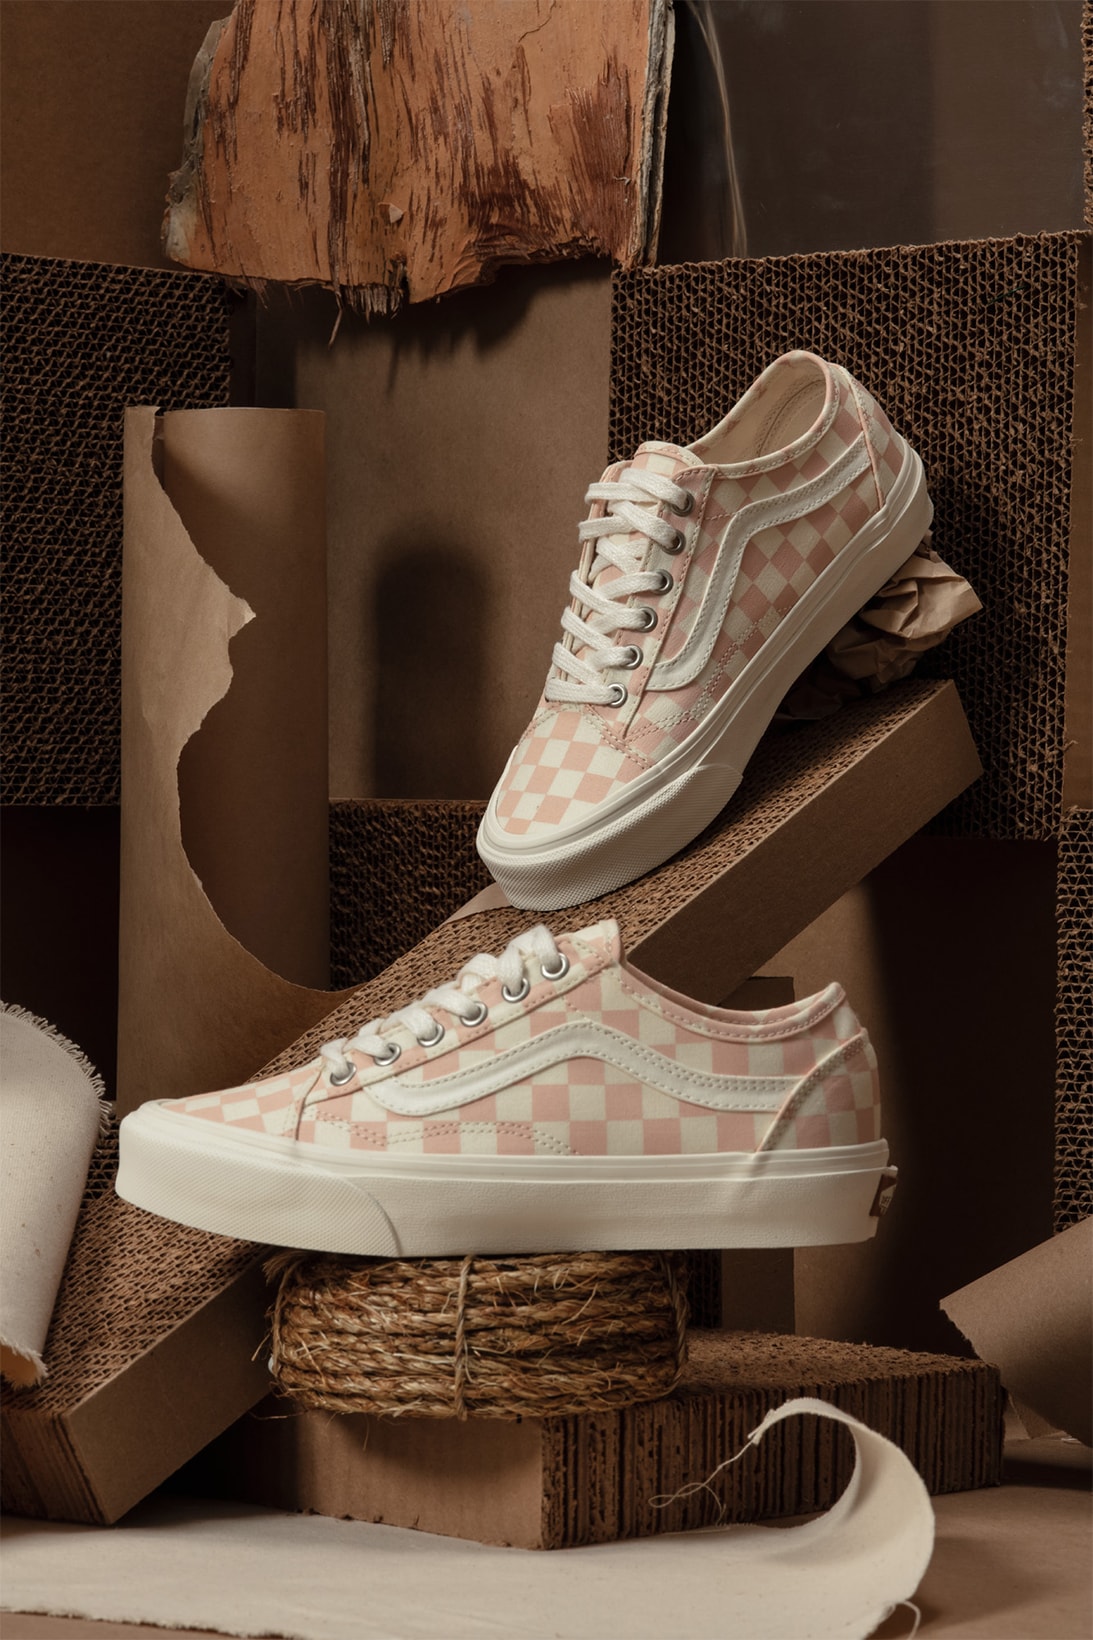 Vans Eco Theory Old Skool Decon Collection Sneakers Footwear Shoes Sustainable Pink White